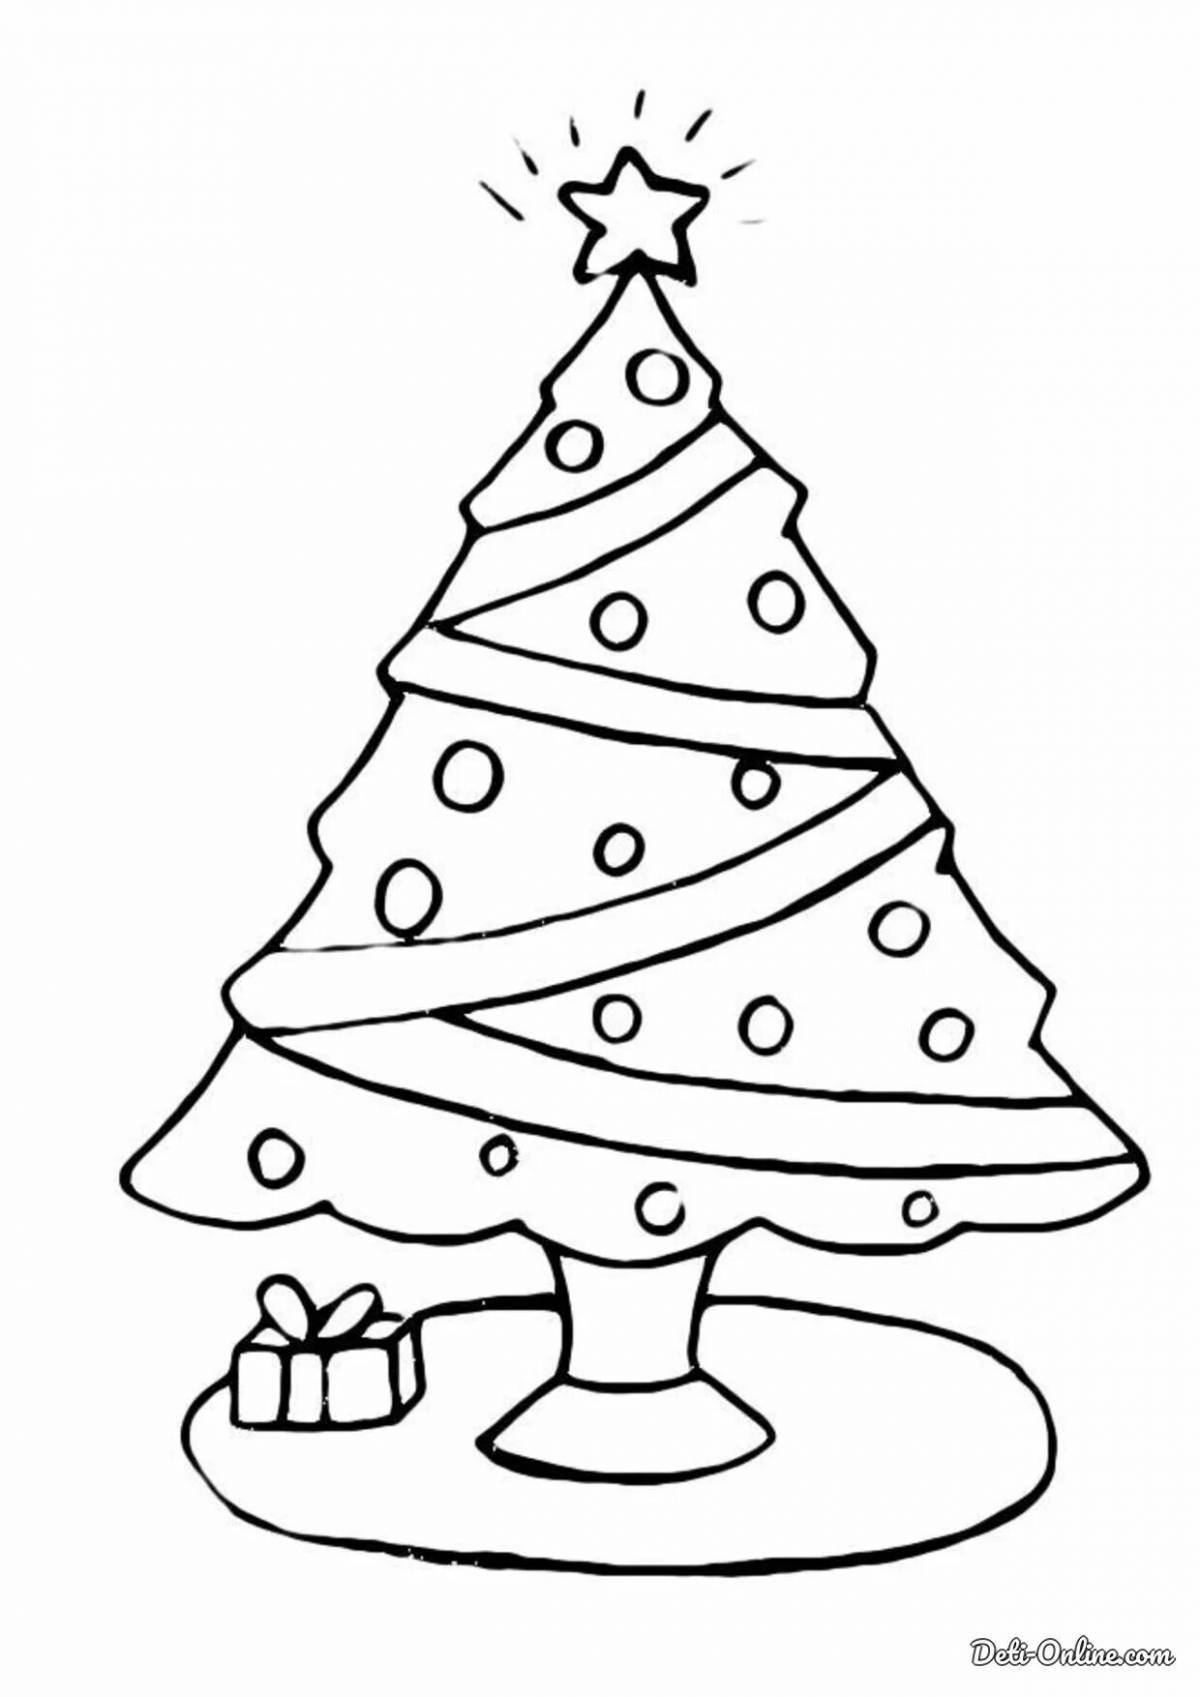 Christmas tree playful coloring book for girls